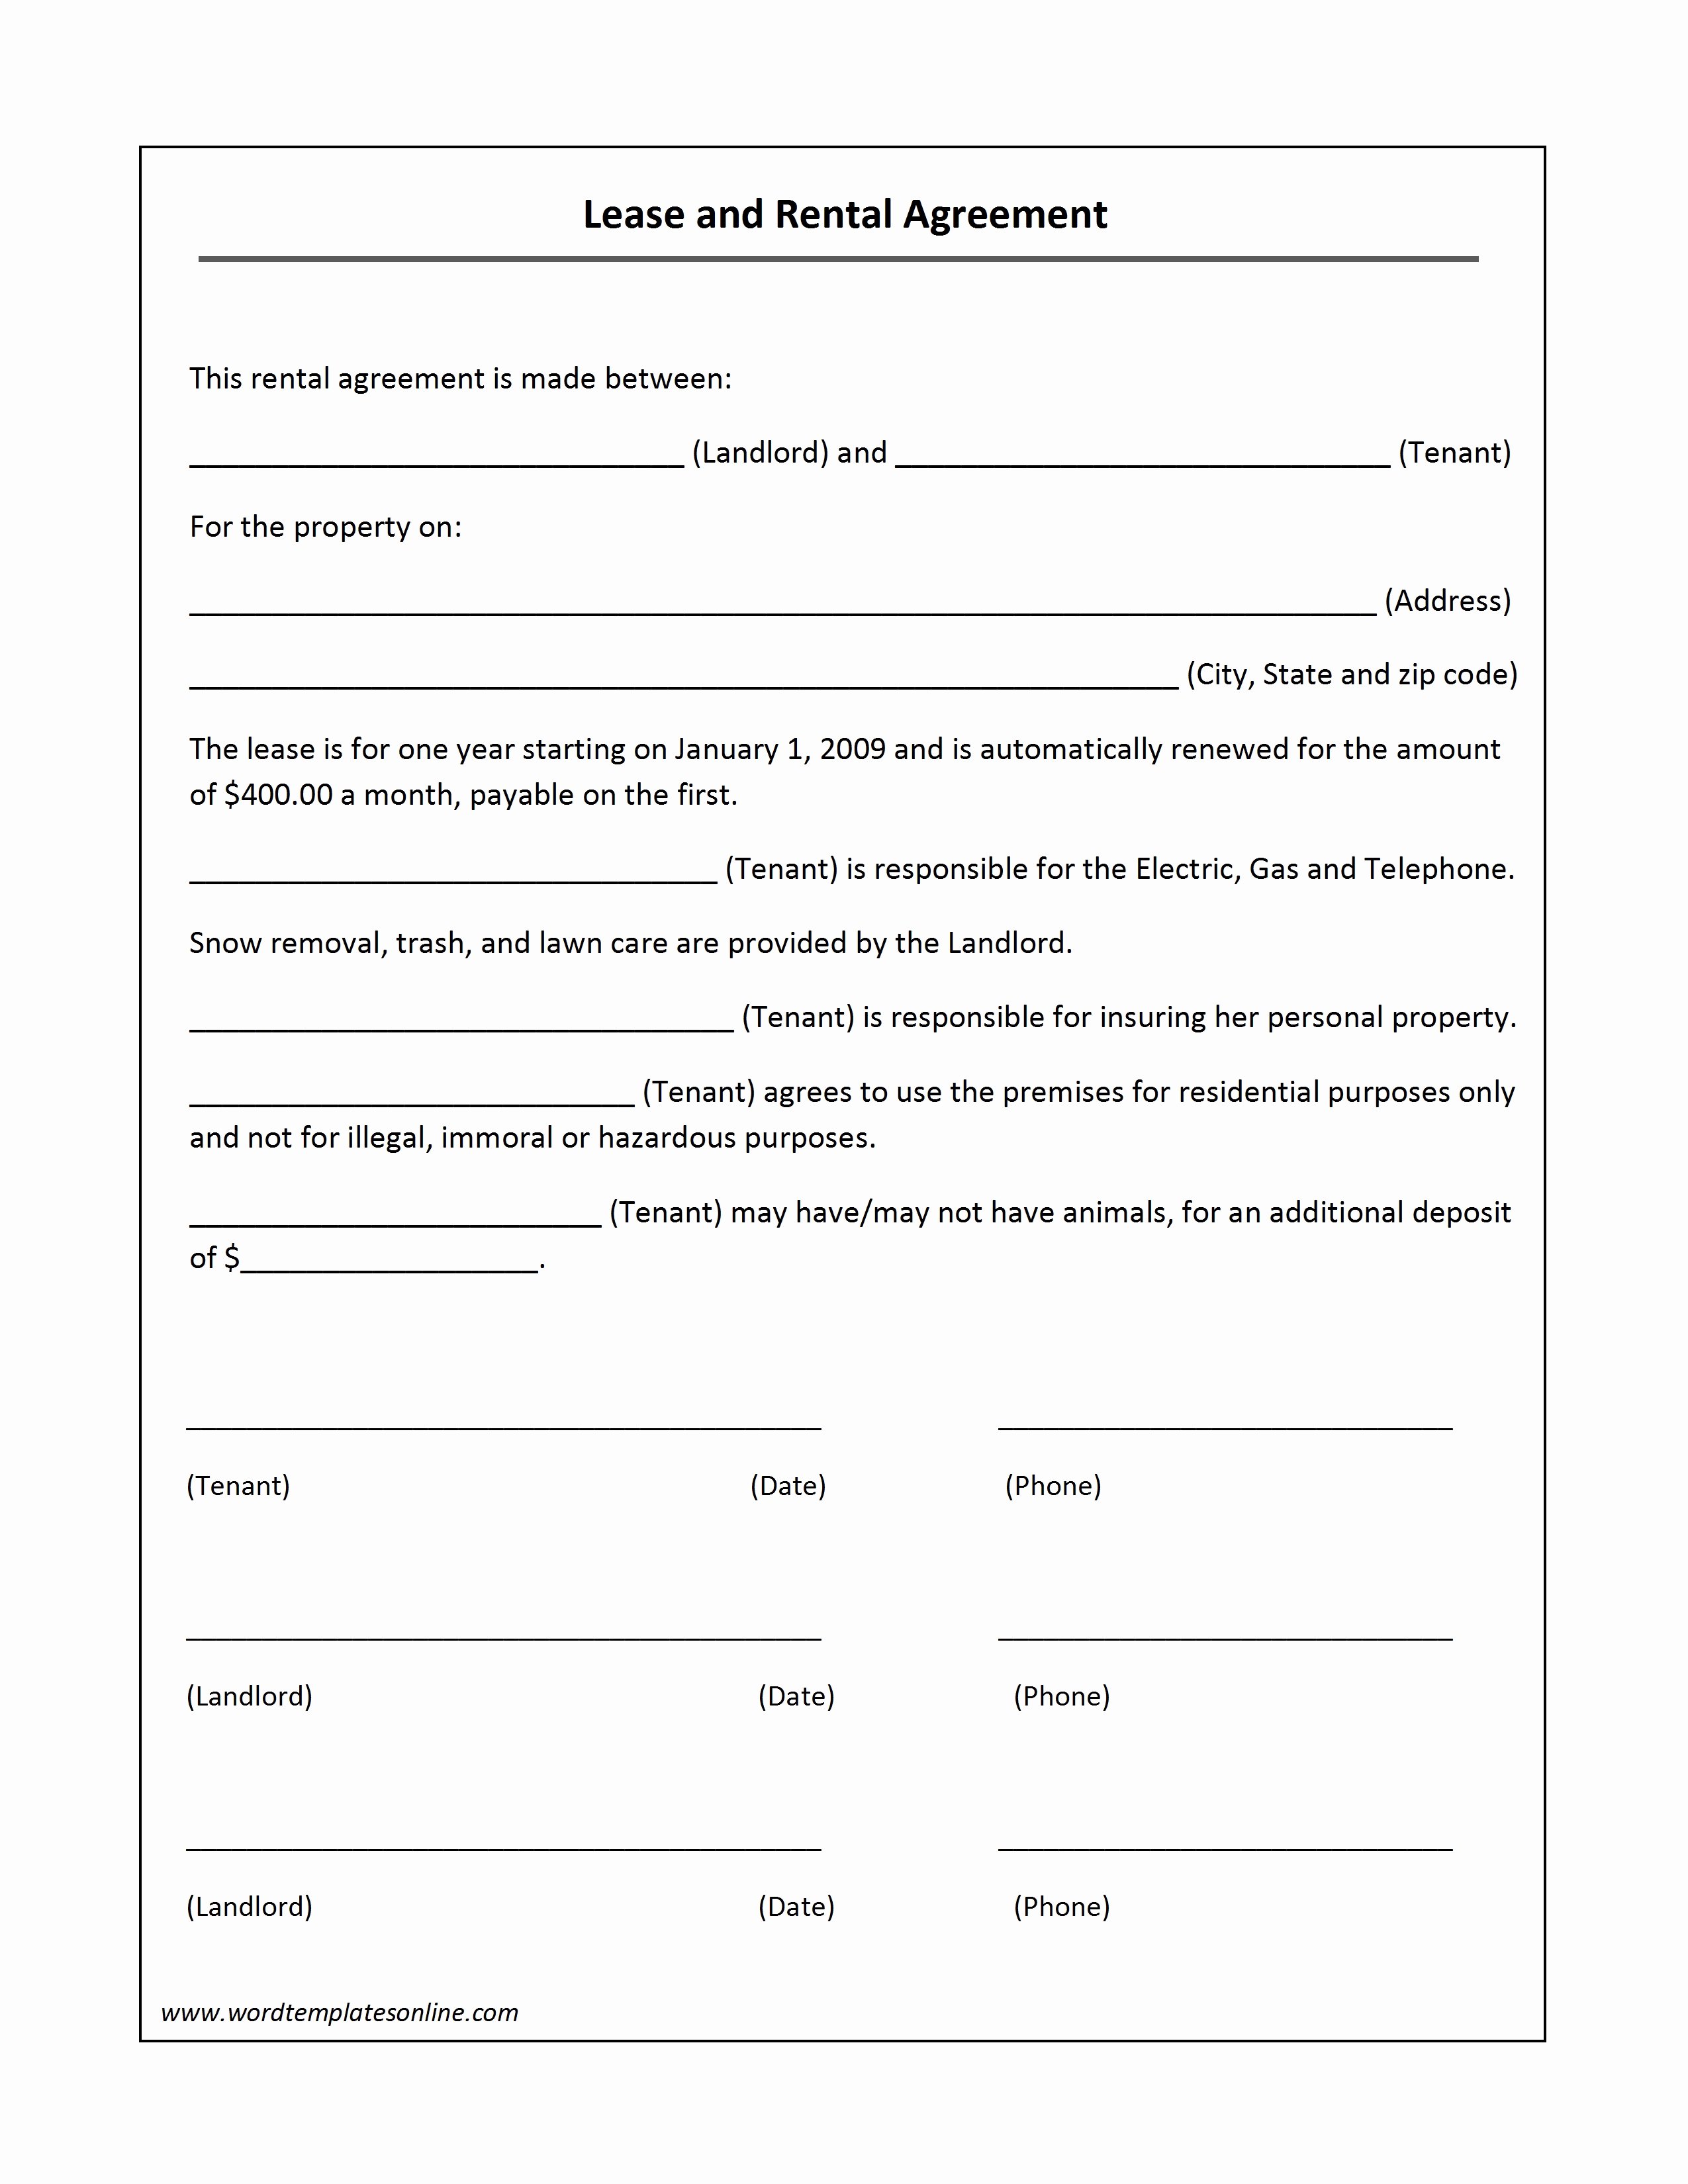 Free Rental Agreement Template Awesome Lease Agreement Template